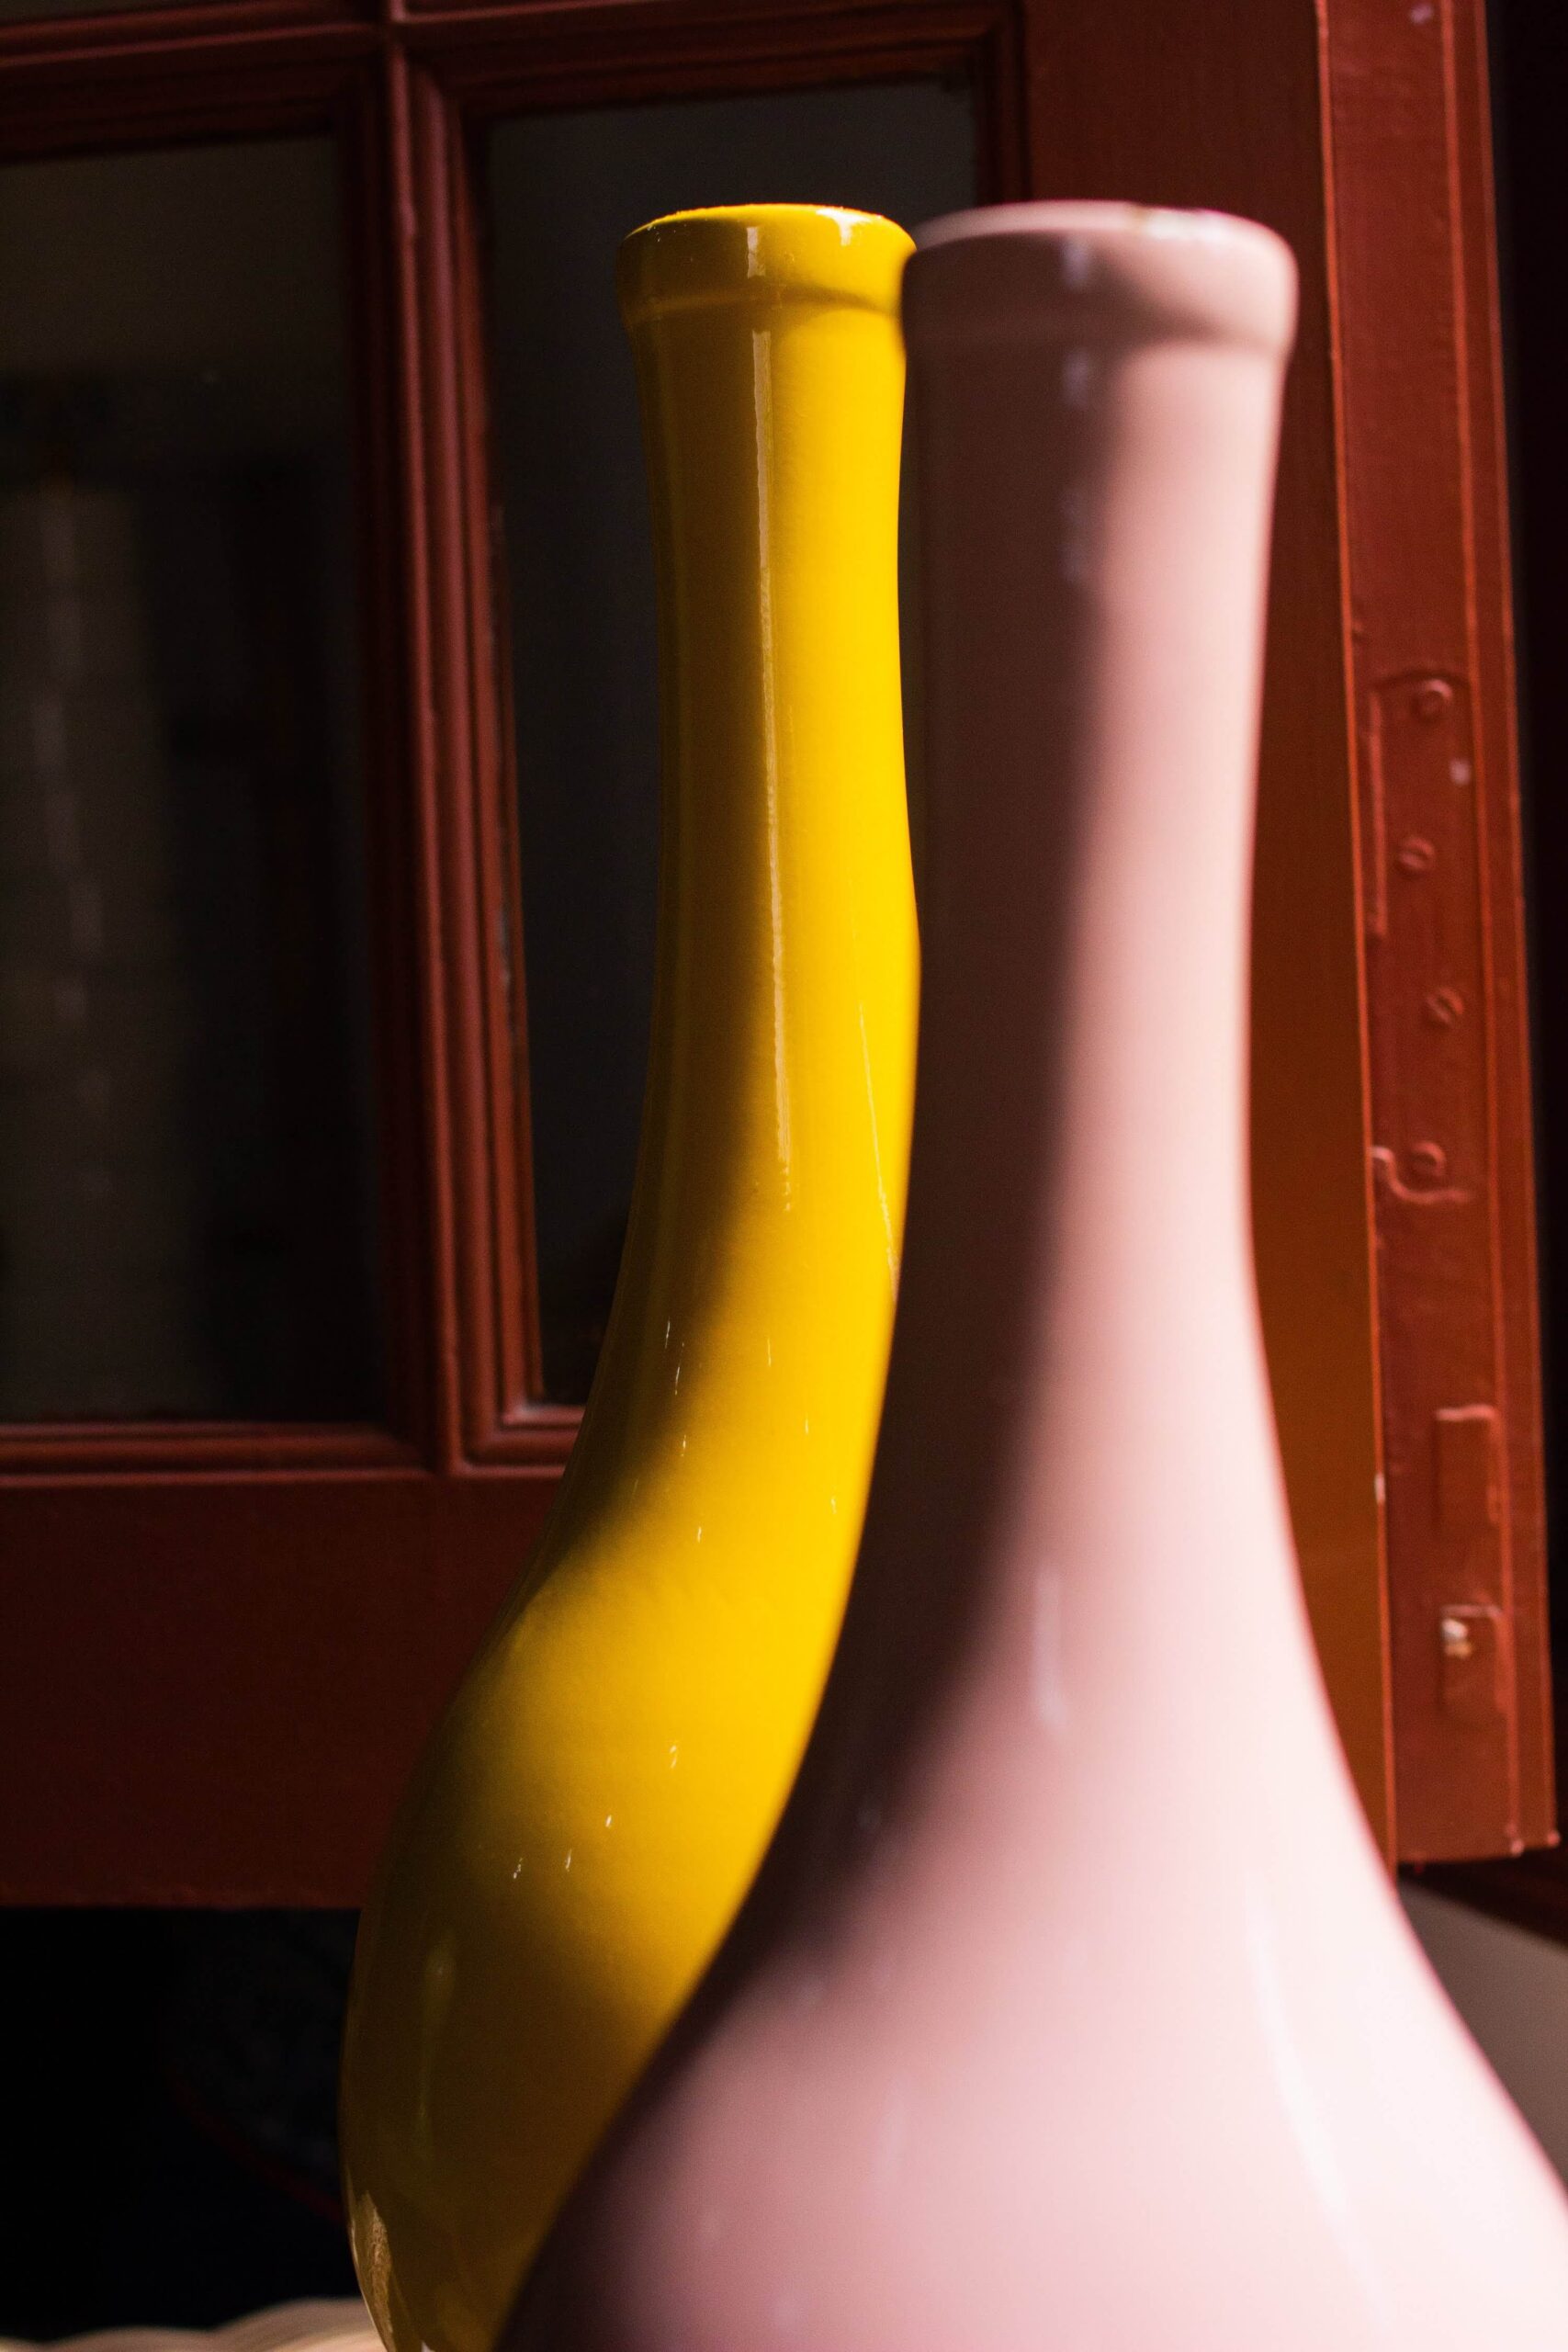 neck of one pink and one yellow lacquer vase